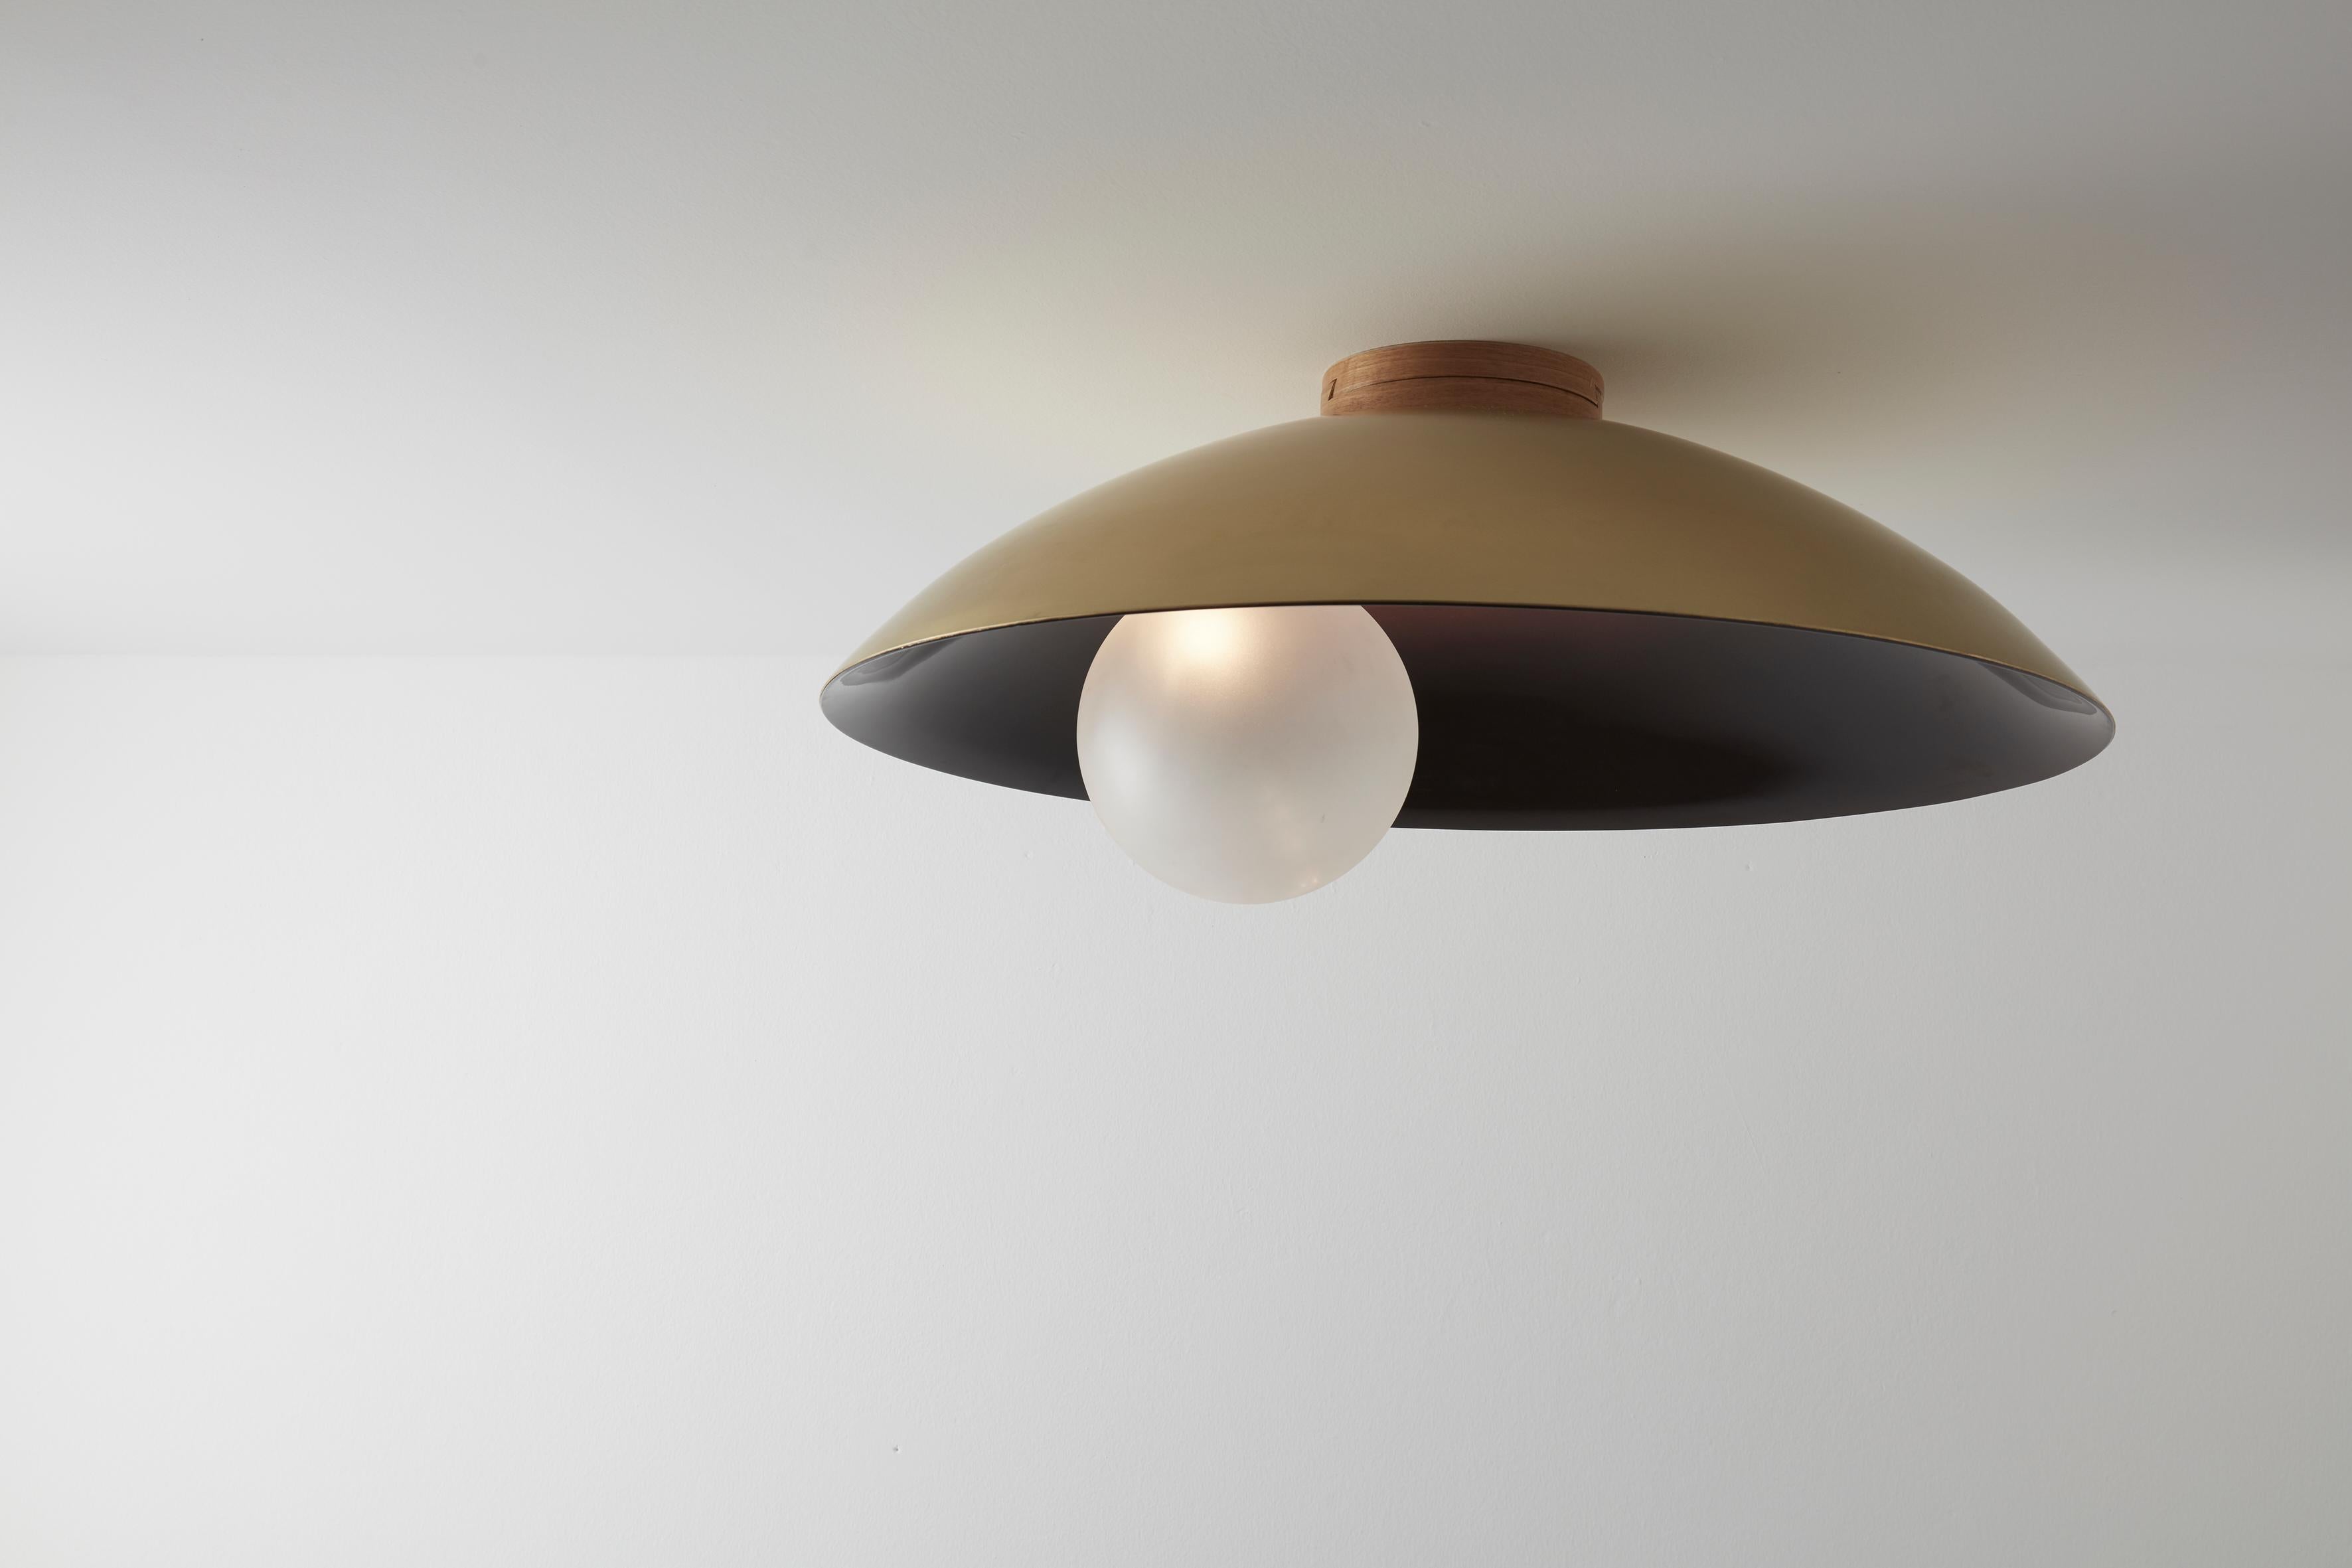 Oyster ceiling mounted Burgundy, Carla Baz
Dimensions: ø 70 x D 32 cm
Weight: 9 kg
Material: Brass, blown satin glass globes

Oyster is a series of sculptural lighting pieces that were developed in 2016. Wanting to explore the idea of customization